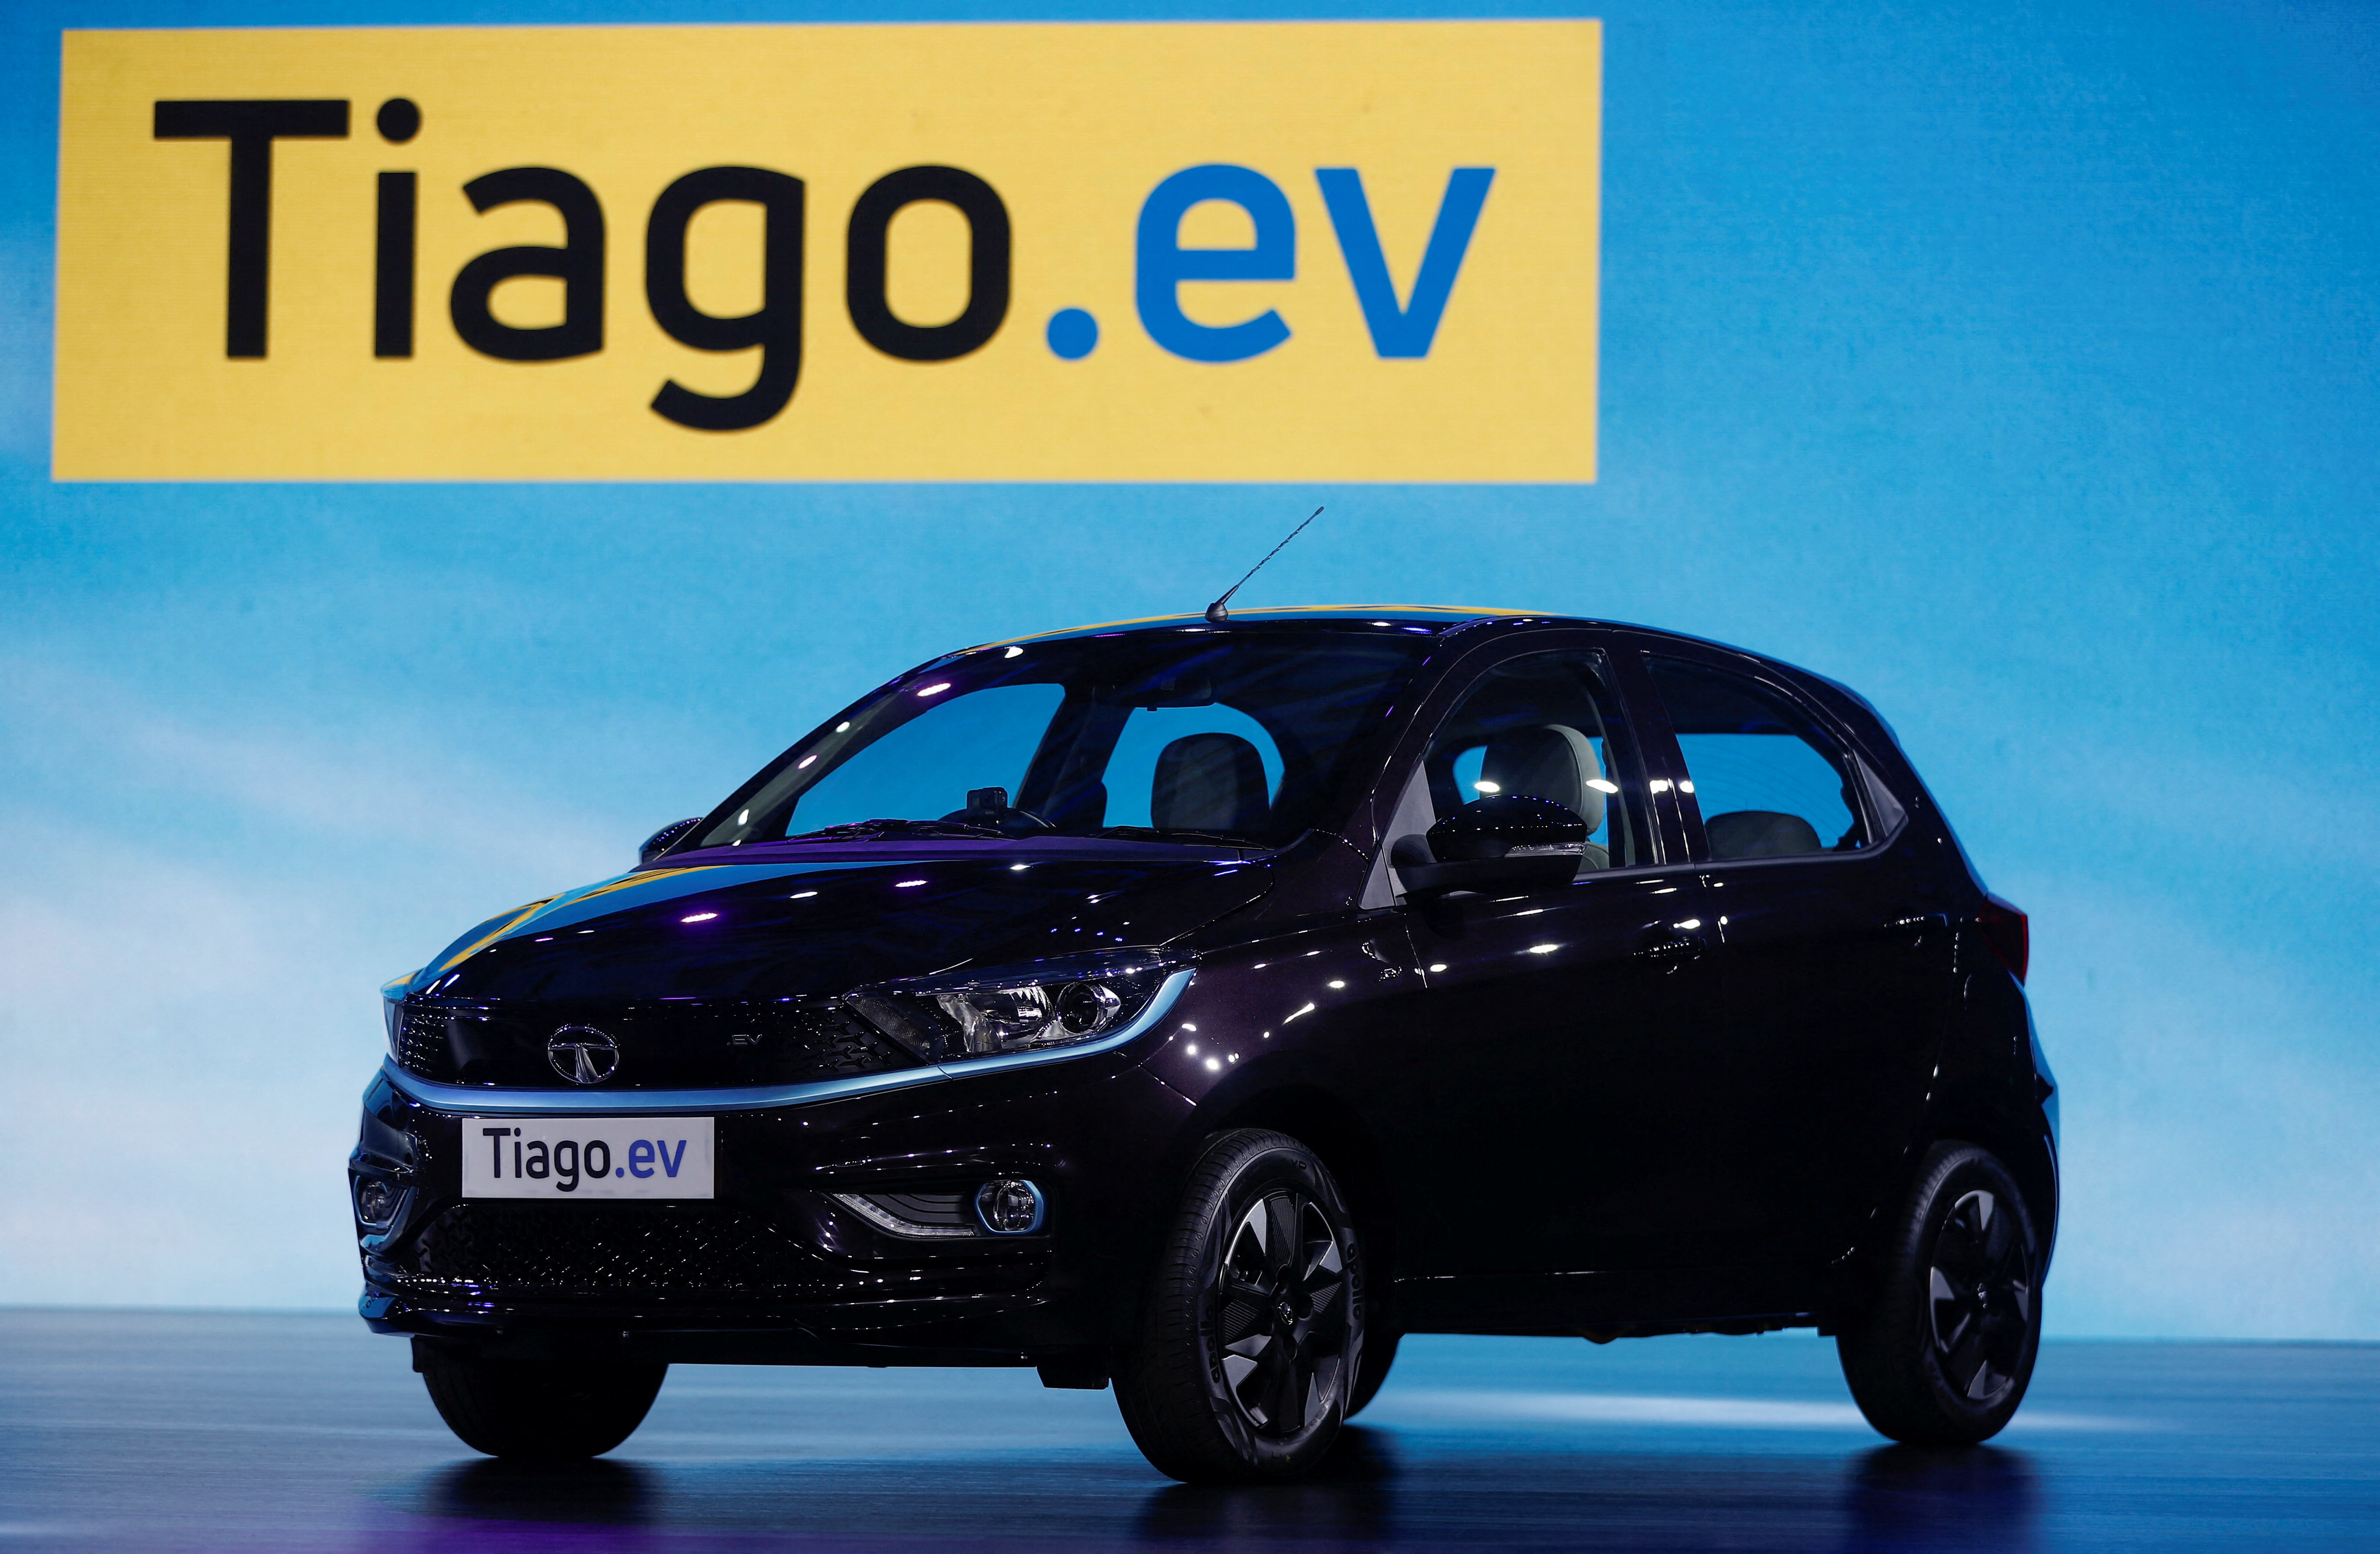 The Tata Tiago EV electric hatchback was unveiled during a global launch event in Mumbai